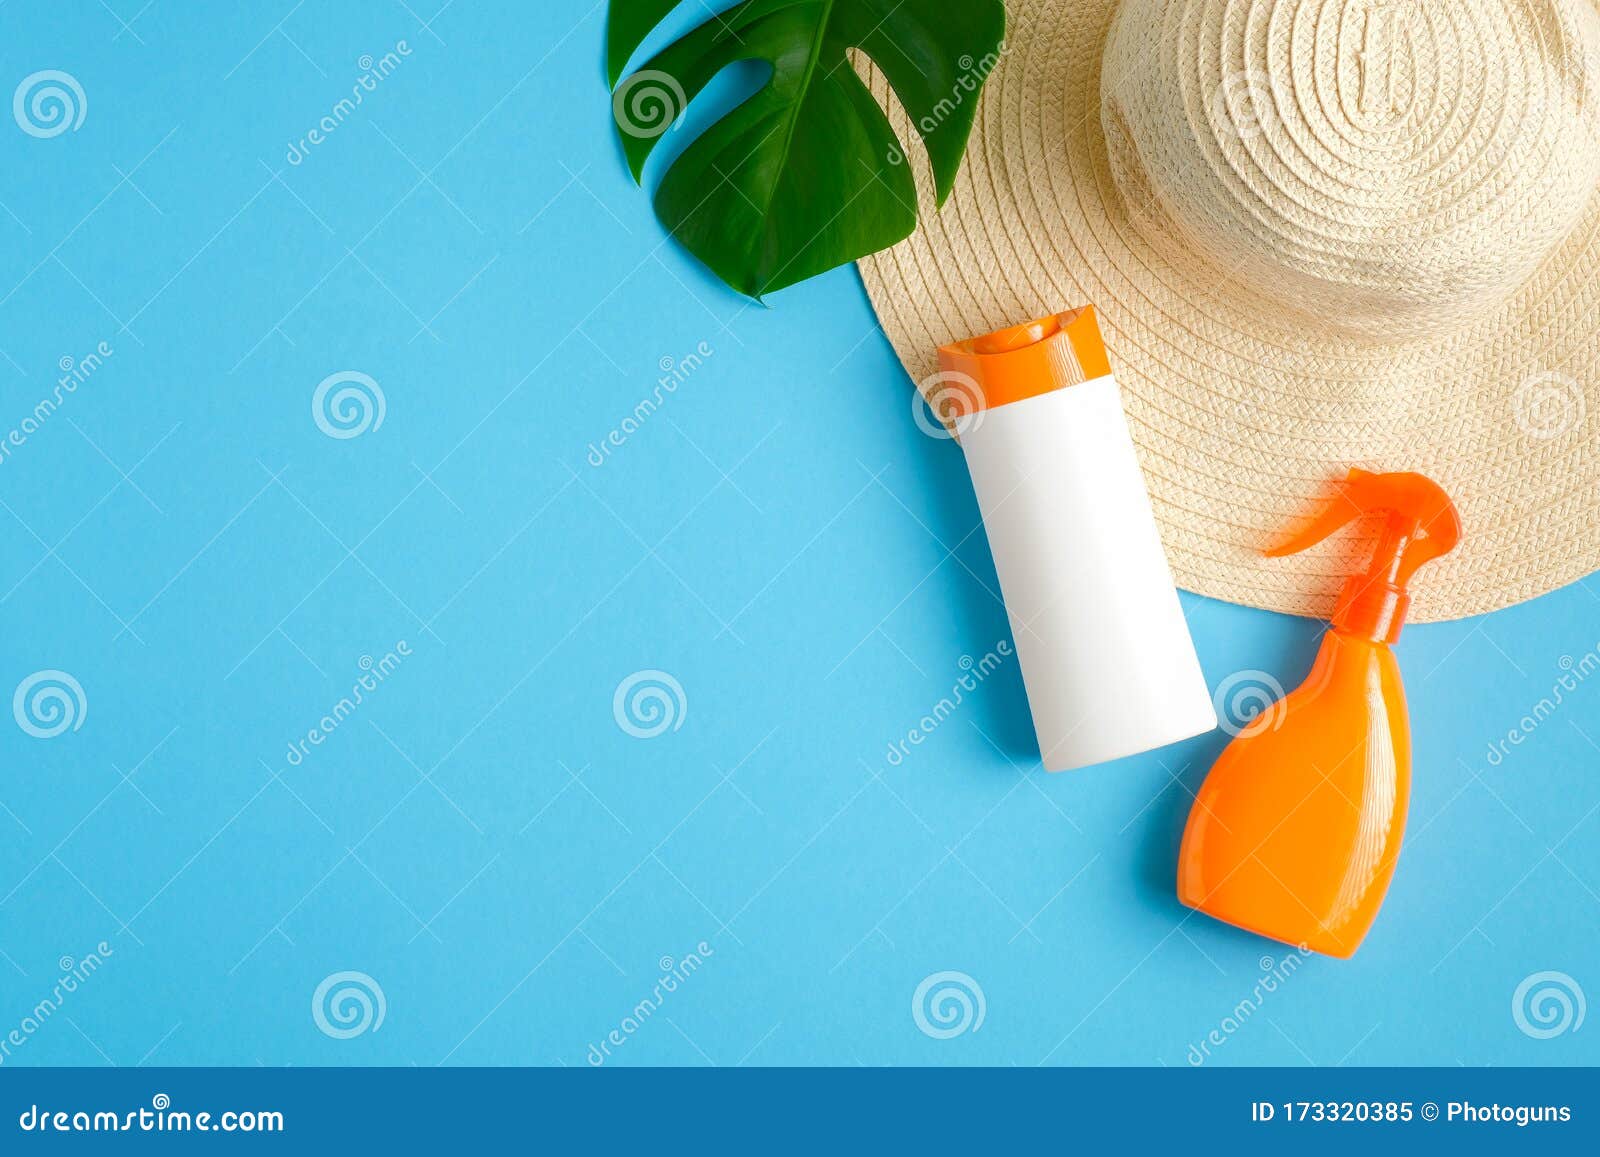 Suntan or Sunblock Lotions Packages on Blue Background with Beach Hat ...